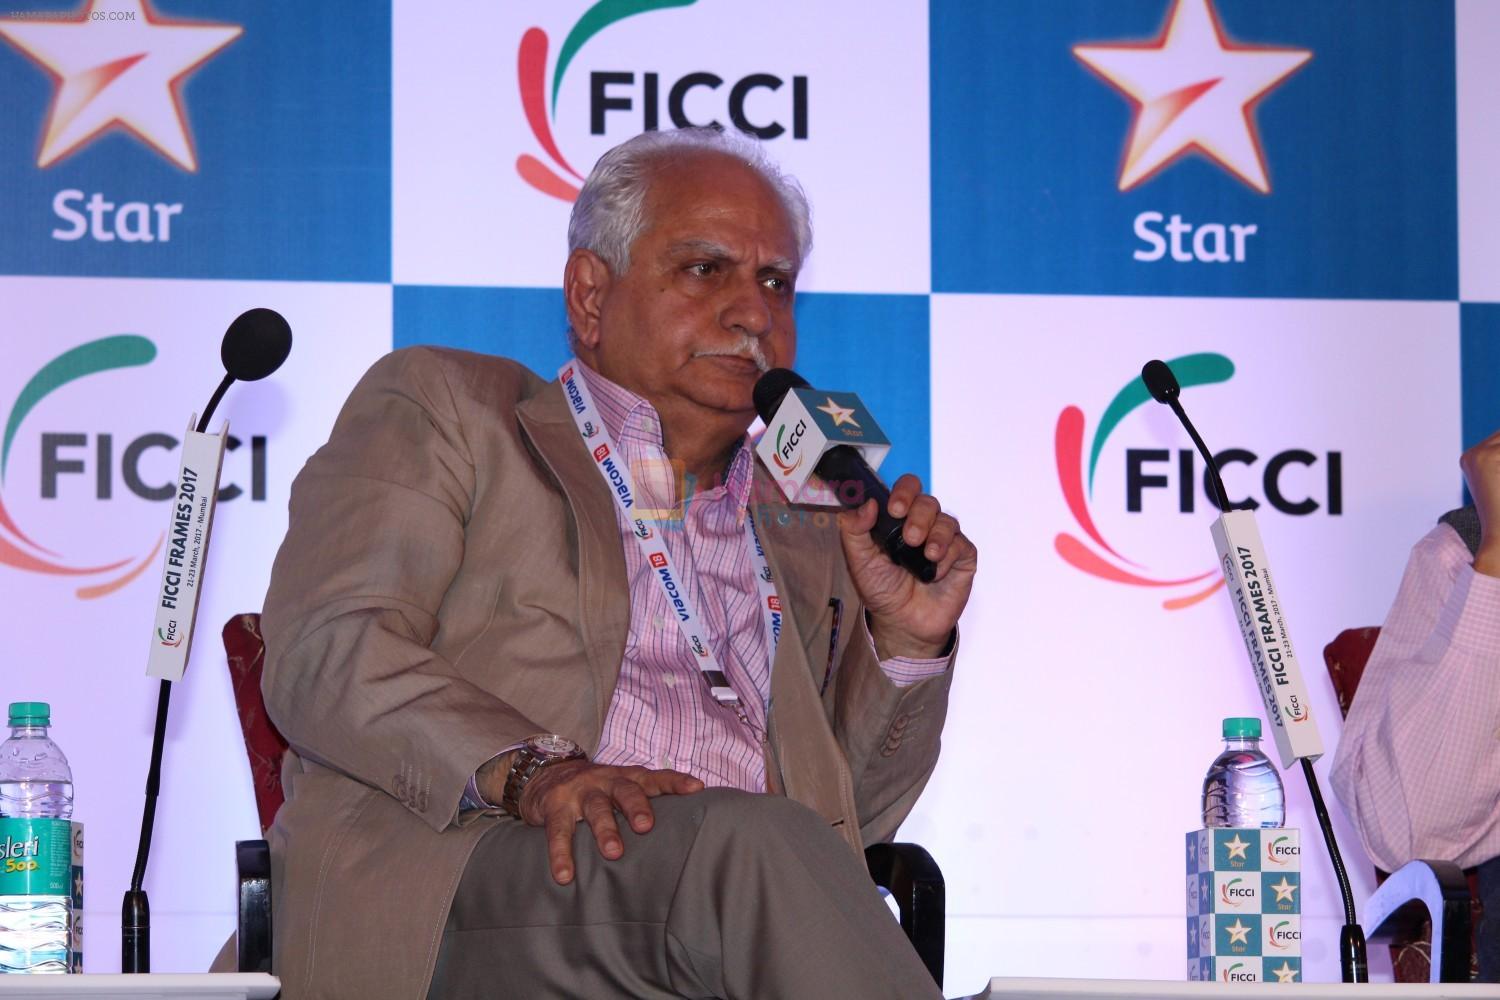 Ramesh Sippy at FICCI Frames 2017 on 22nd March 2017